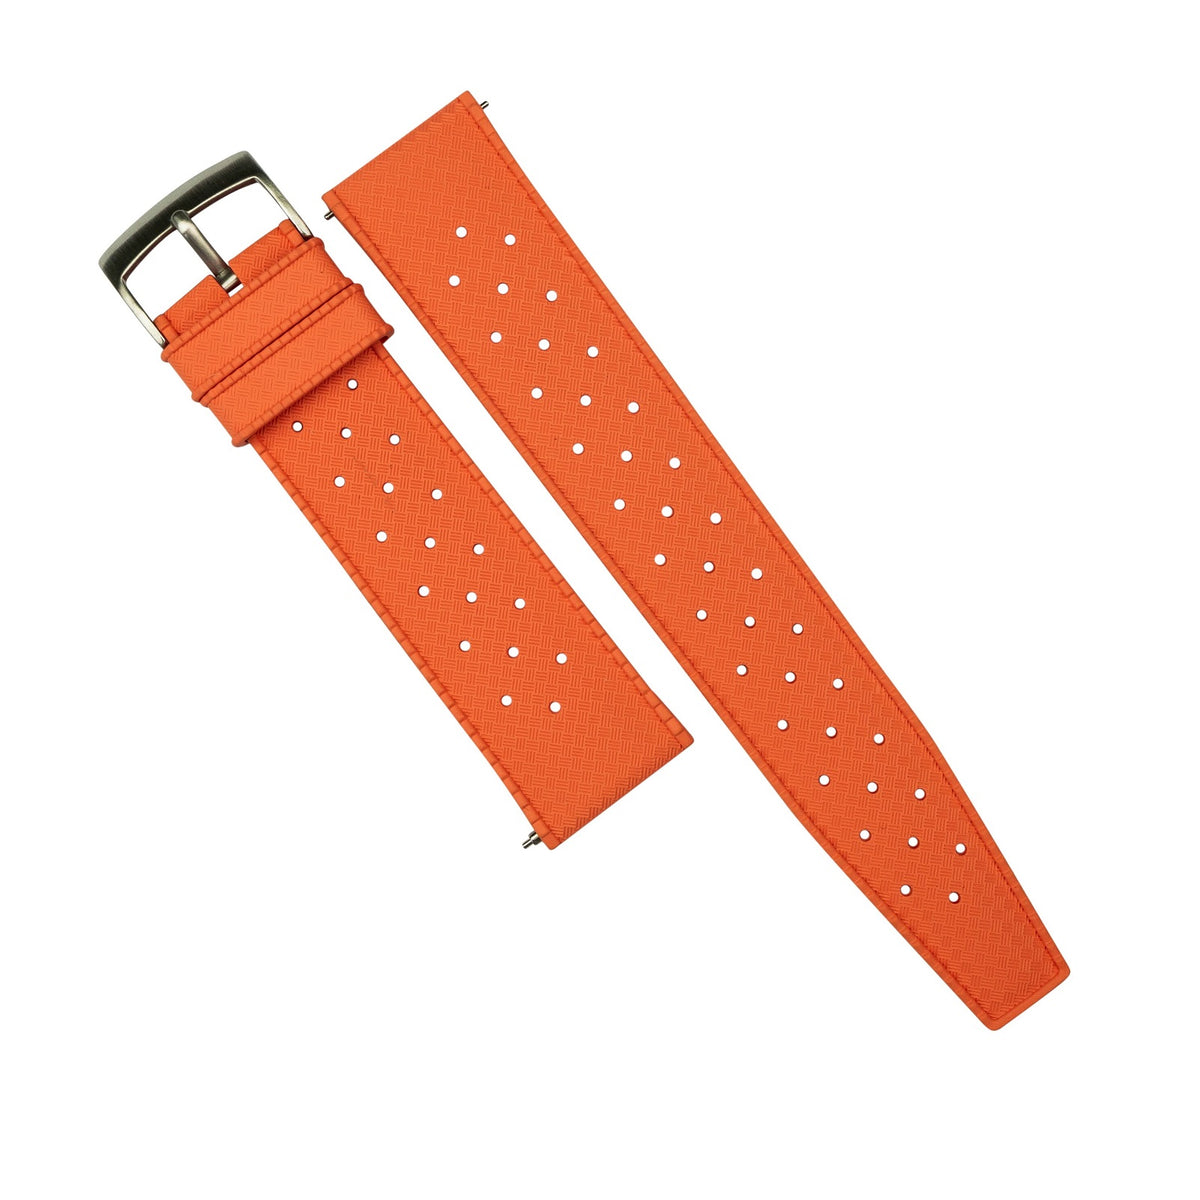 Tropic FKM Rubber Strap in Orange (20mm) - Nomad Watch Works Malaysia